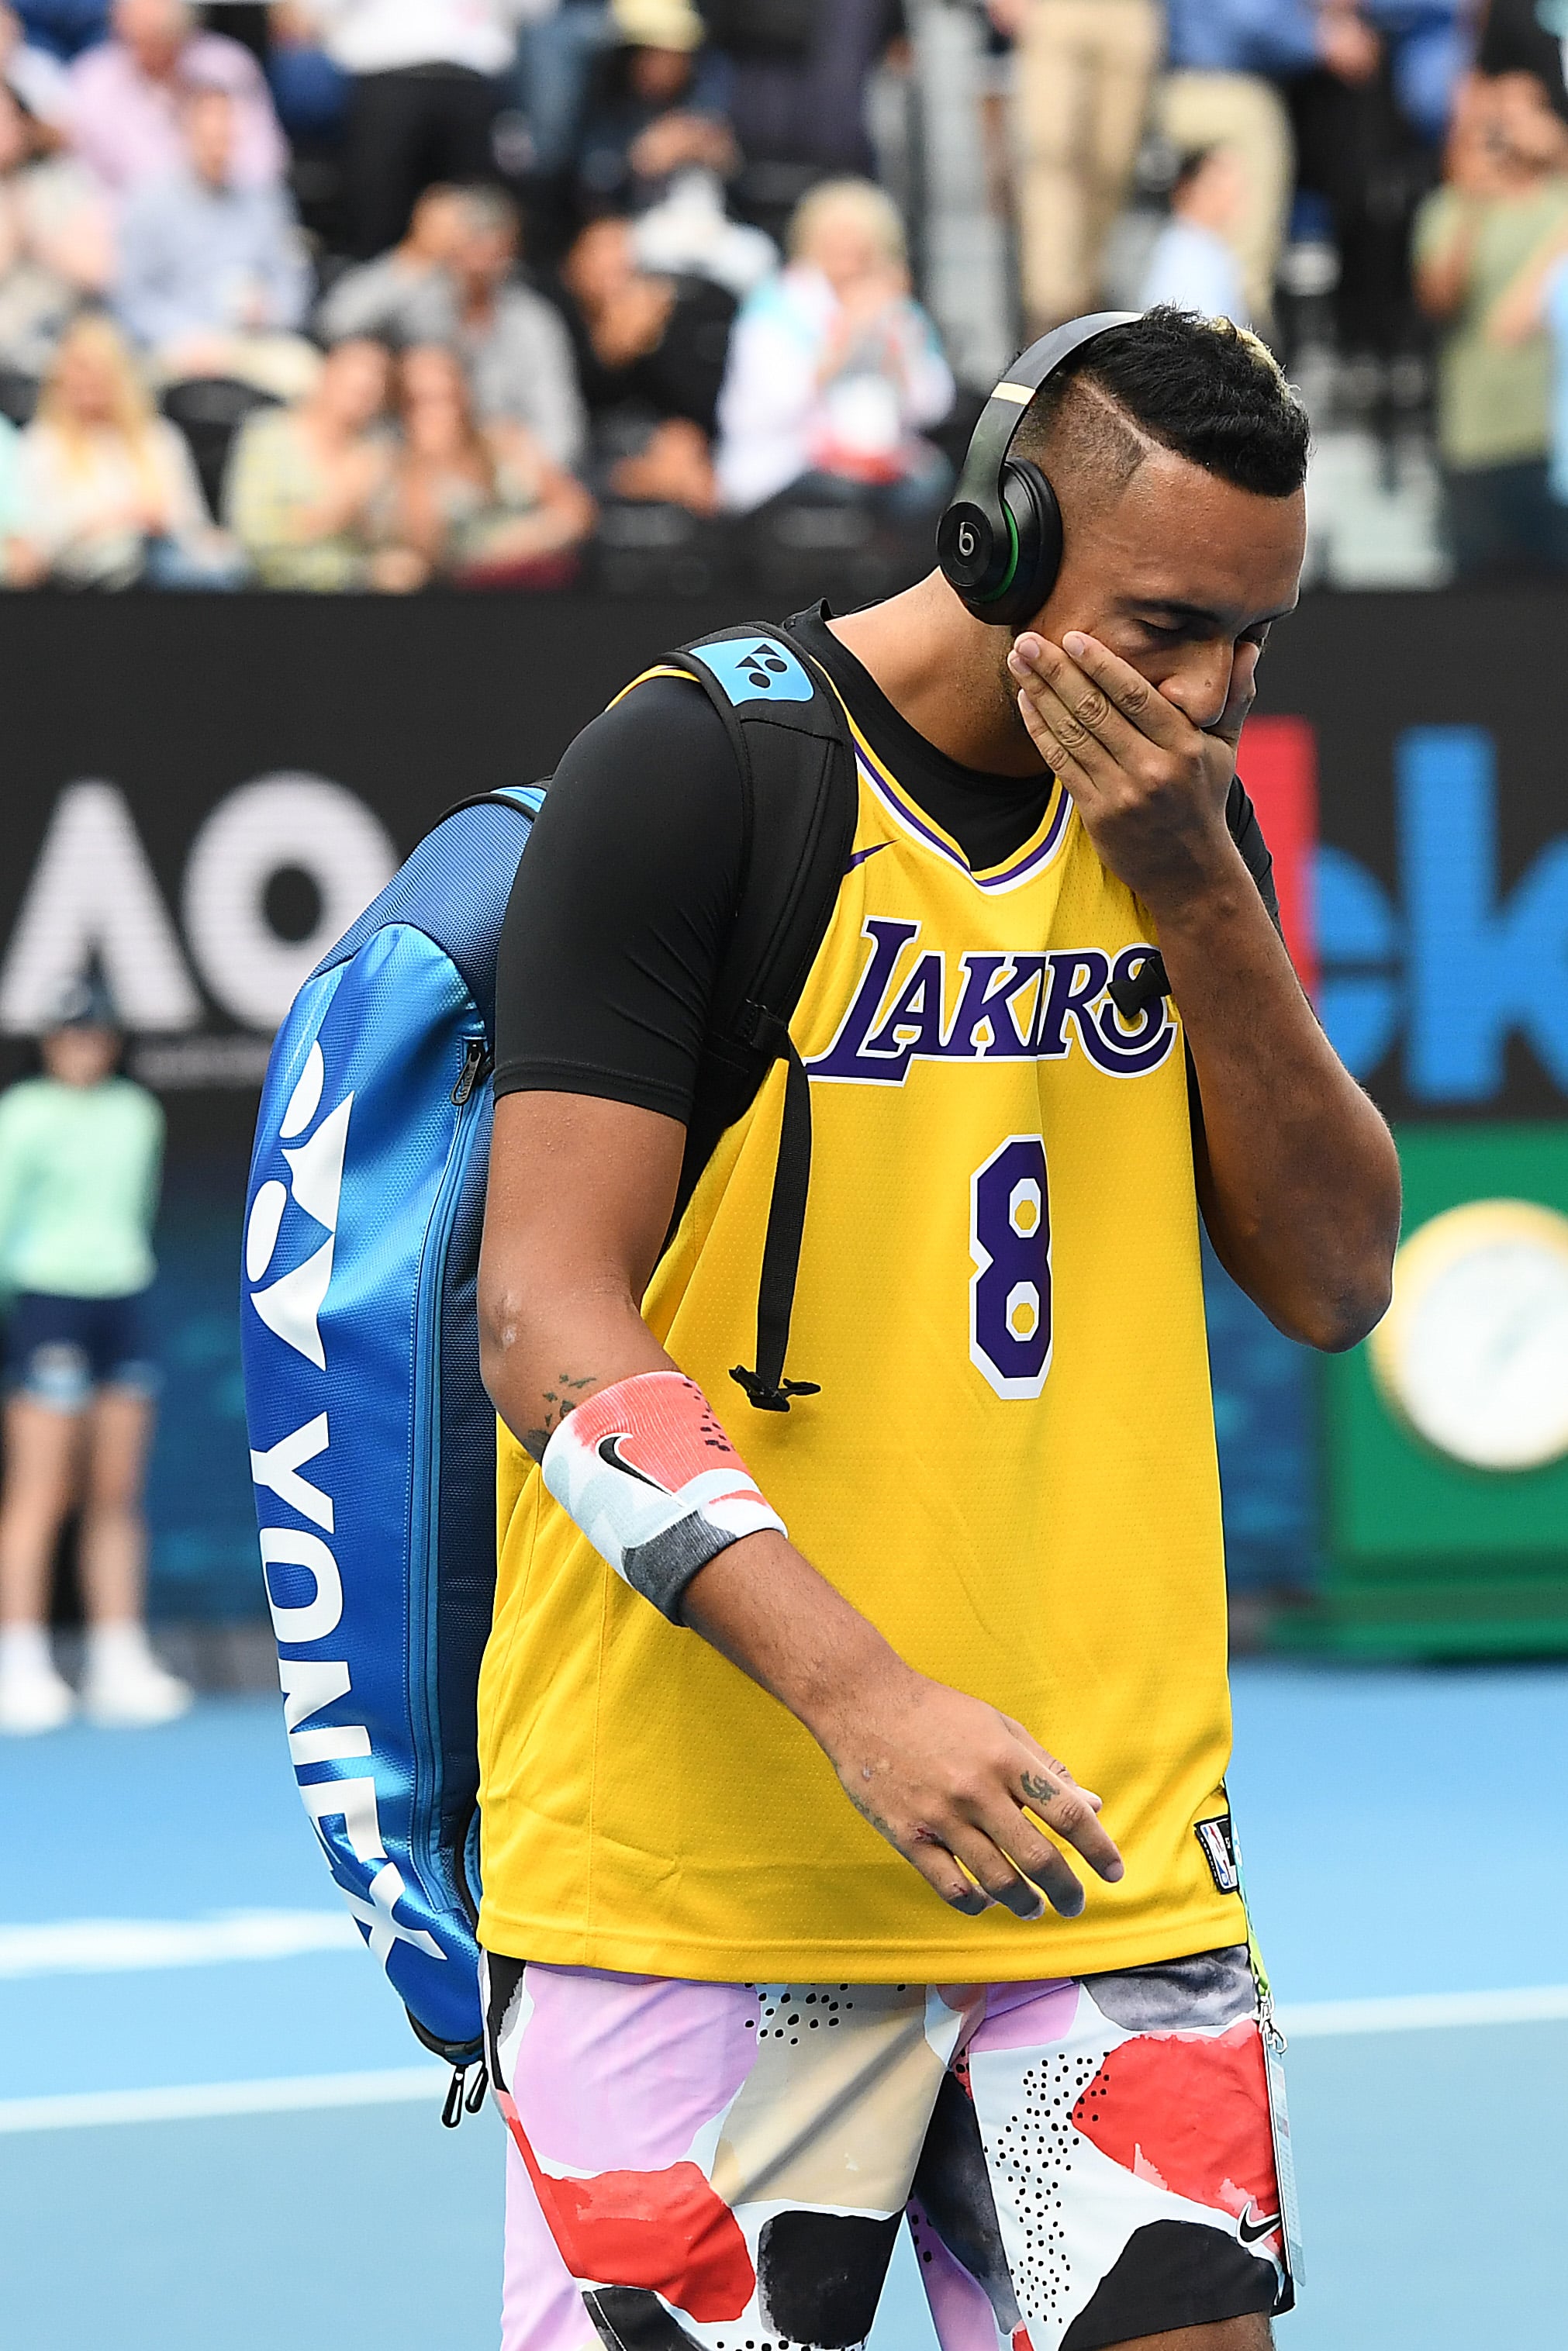 Players pay respects to Kobe Bryant at Australian Open